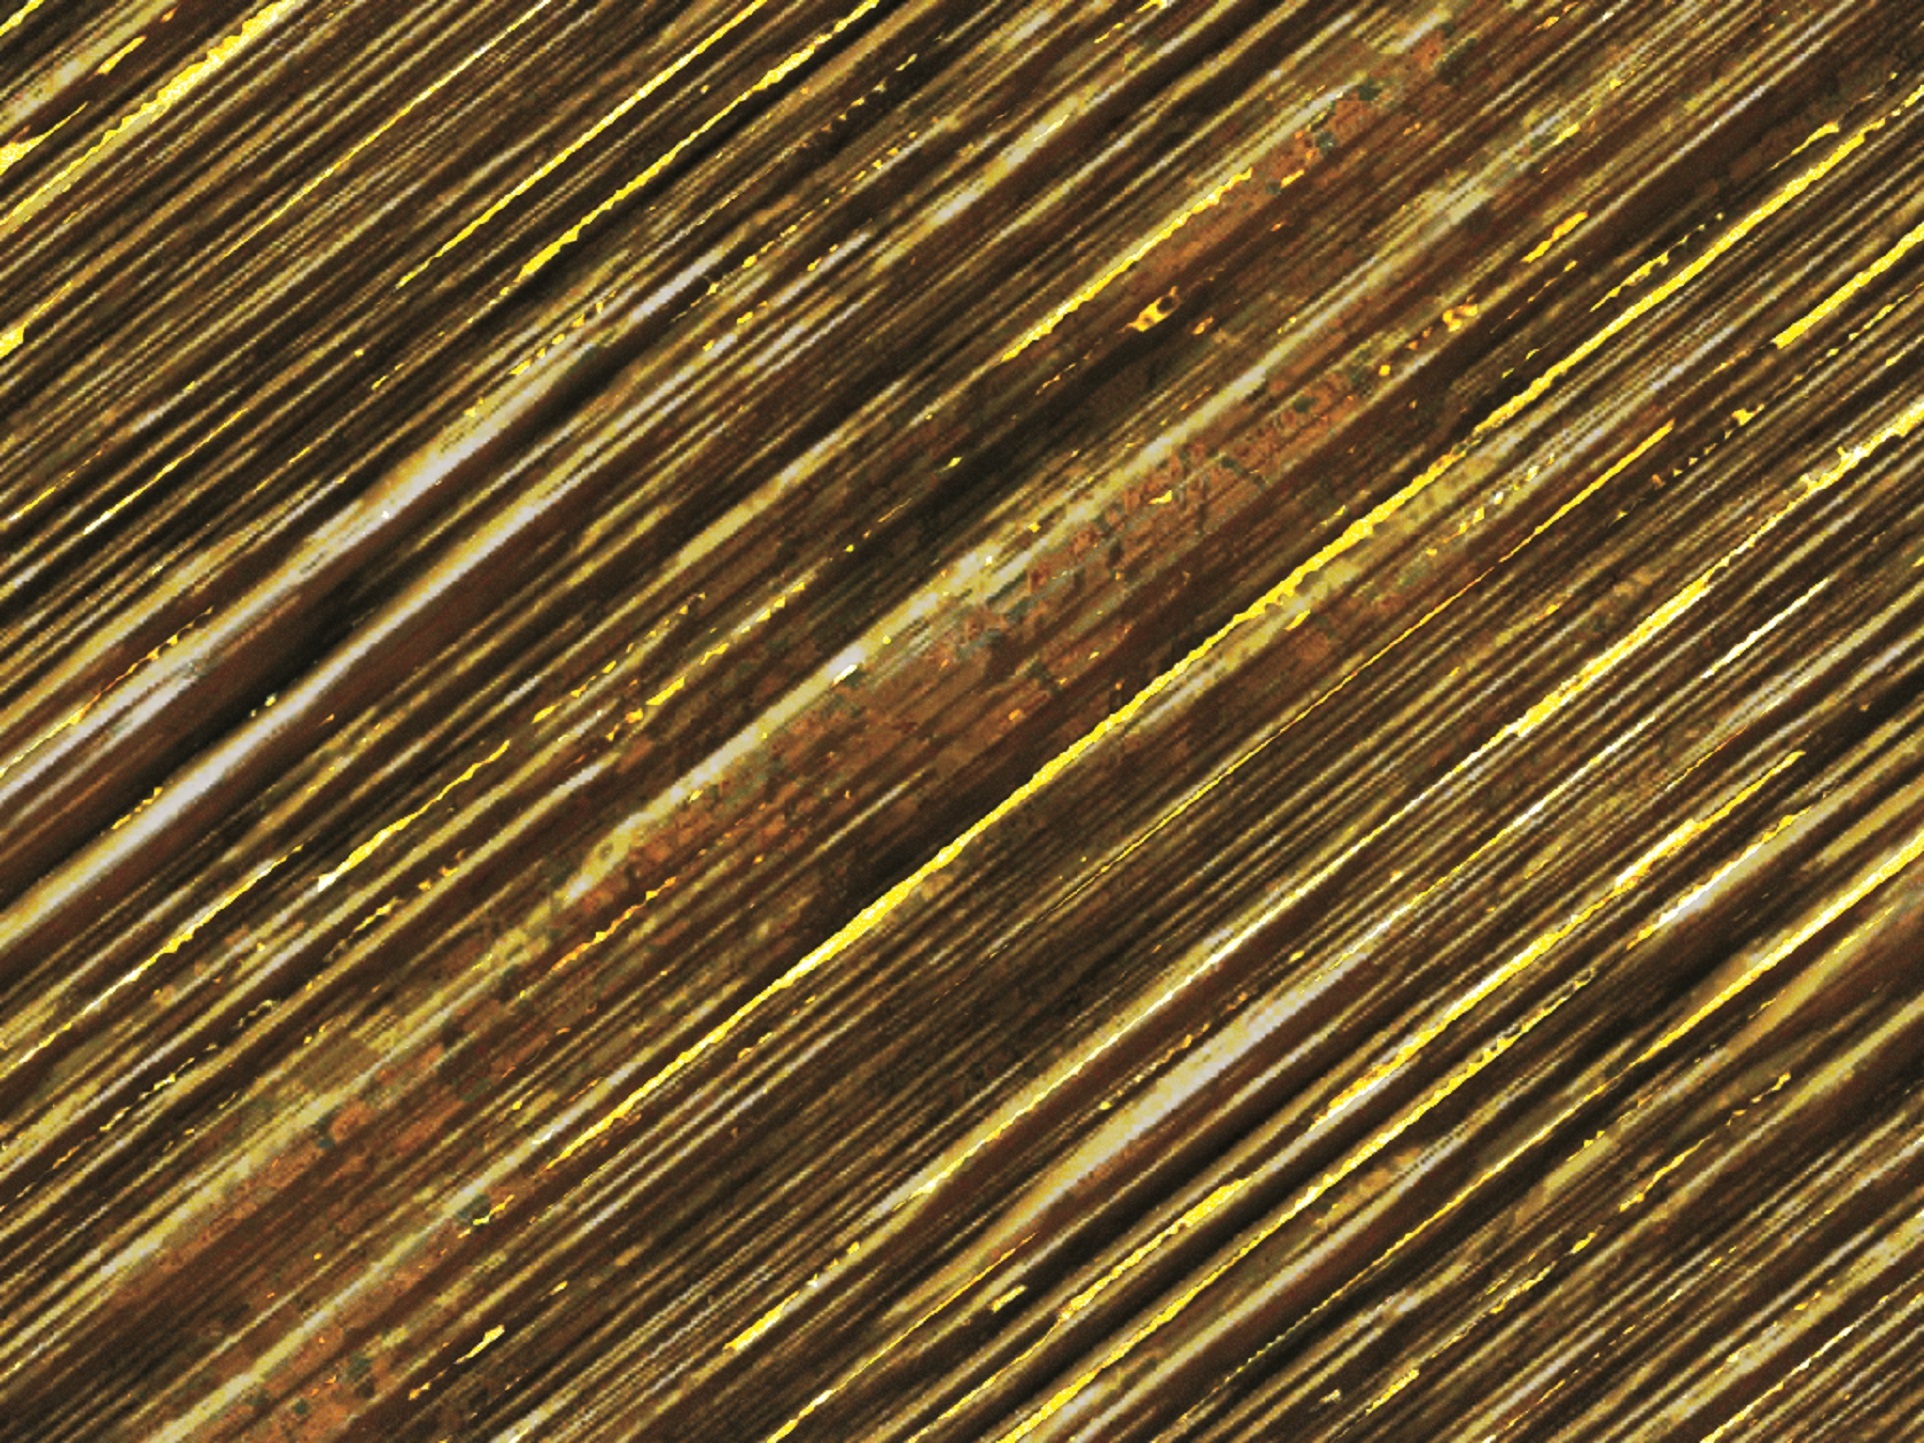 Abstract golden stripes on wallpaper free image download